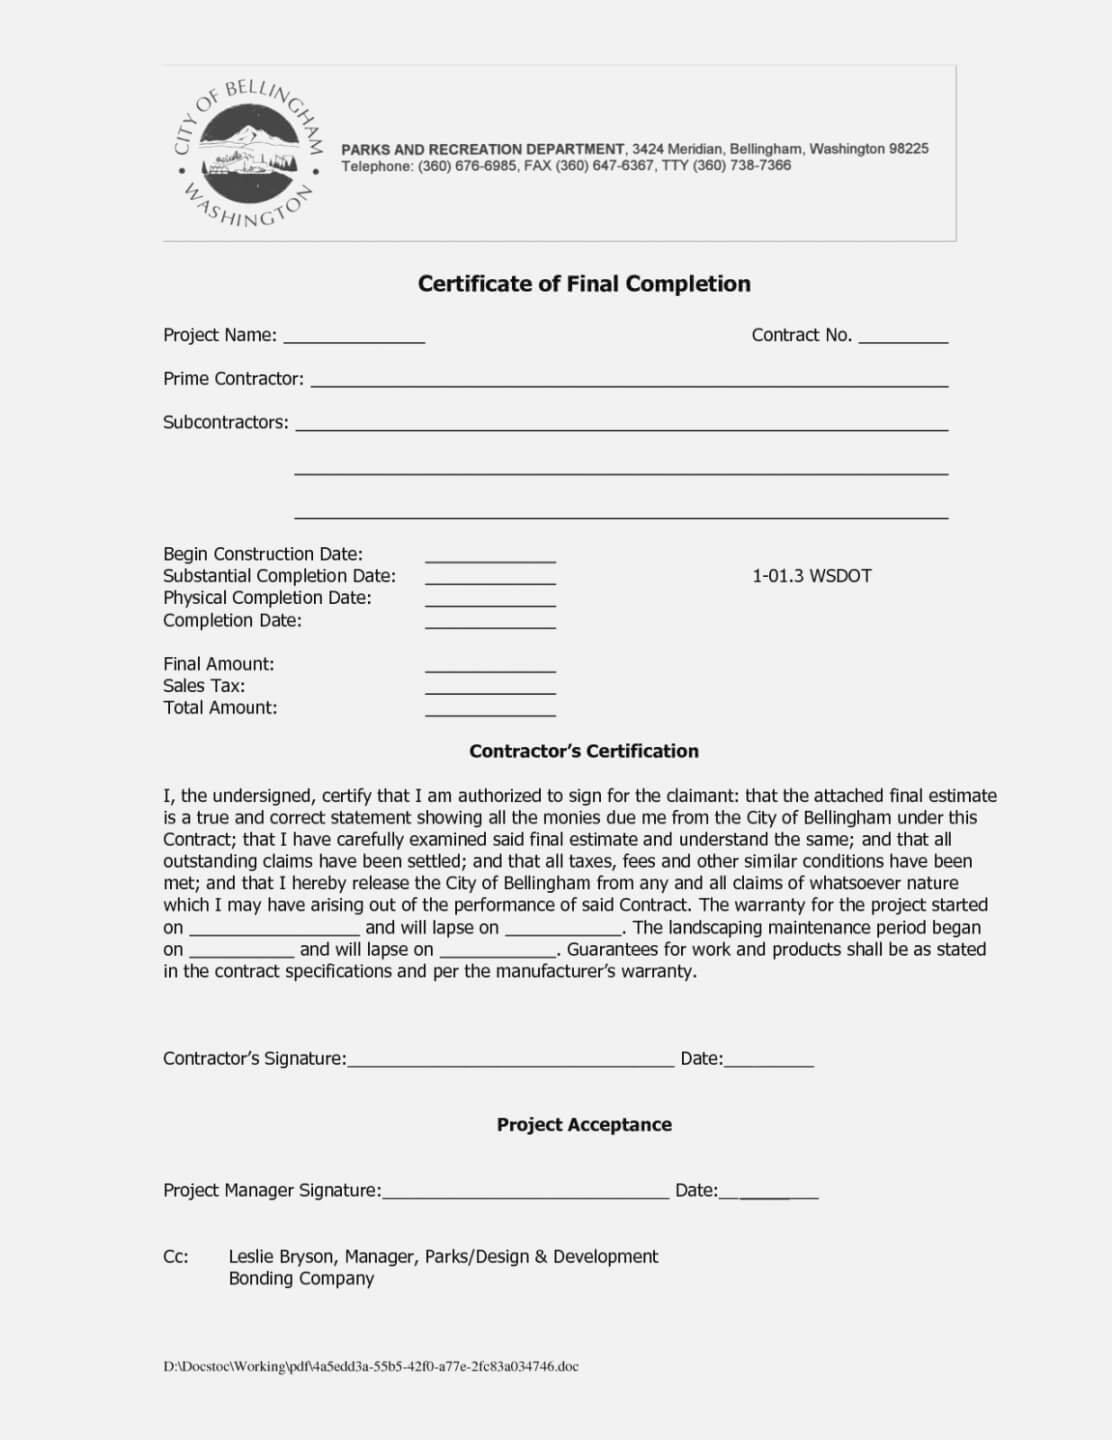 Roofing Certificate Of Completion Template – Zimer.bwong.co With Roof Certification Template